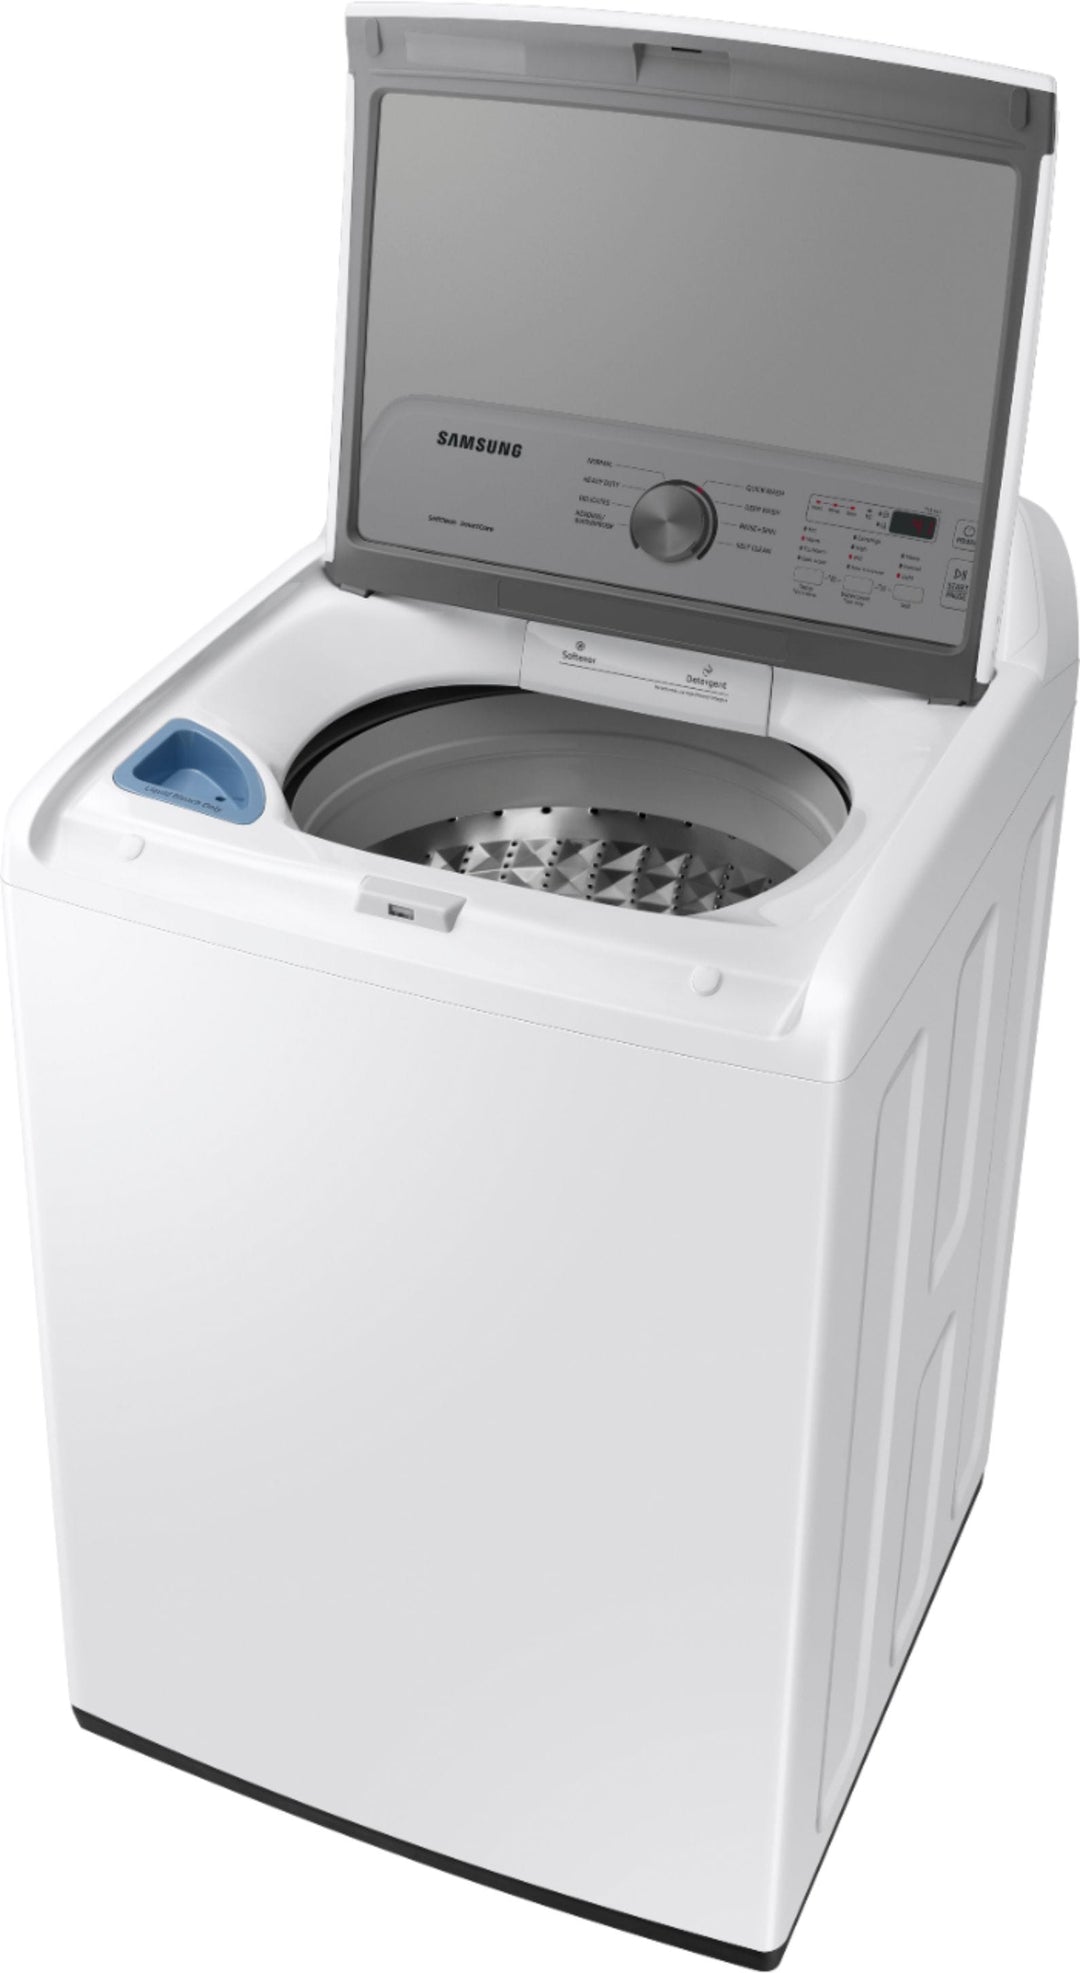 Samsung - 4.5 Cu. Ft. High Efficiency Top Load Washer with Vibration Reduction Technology+ - White_4